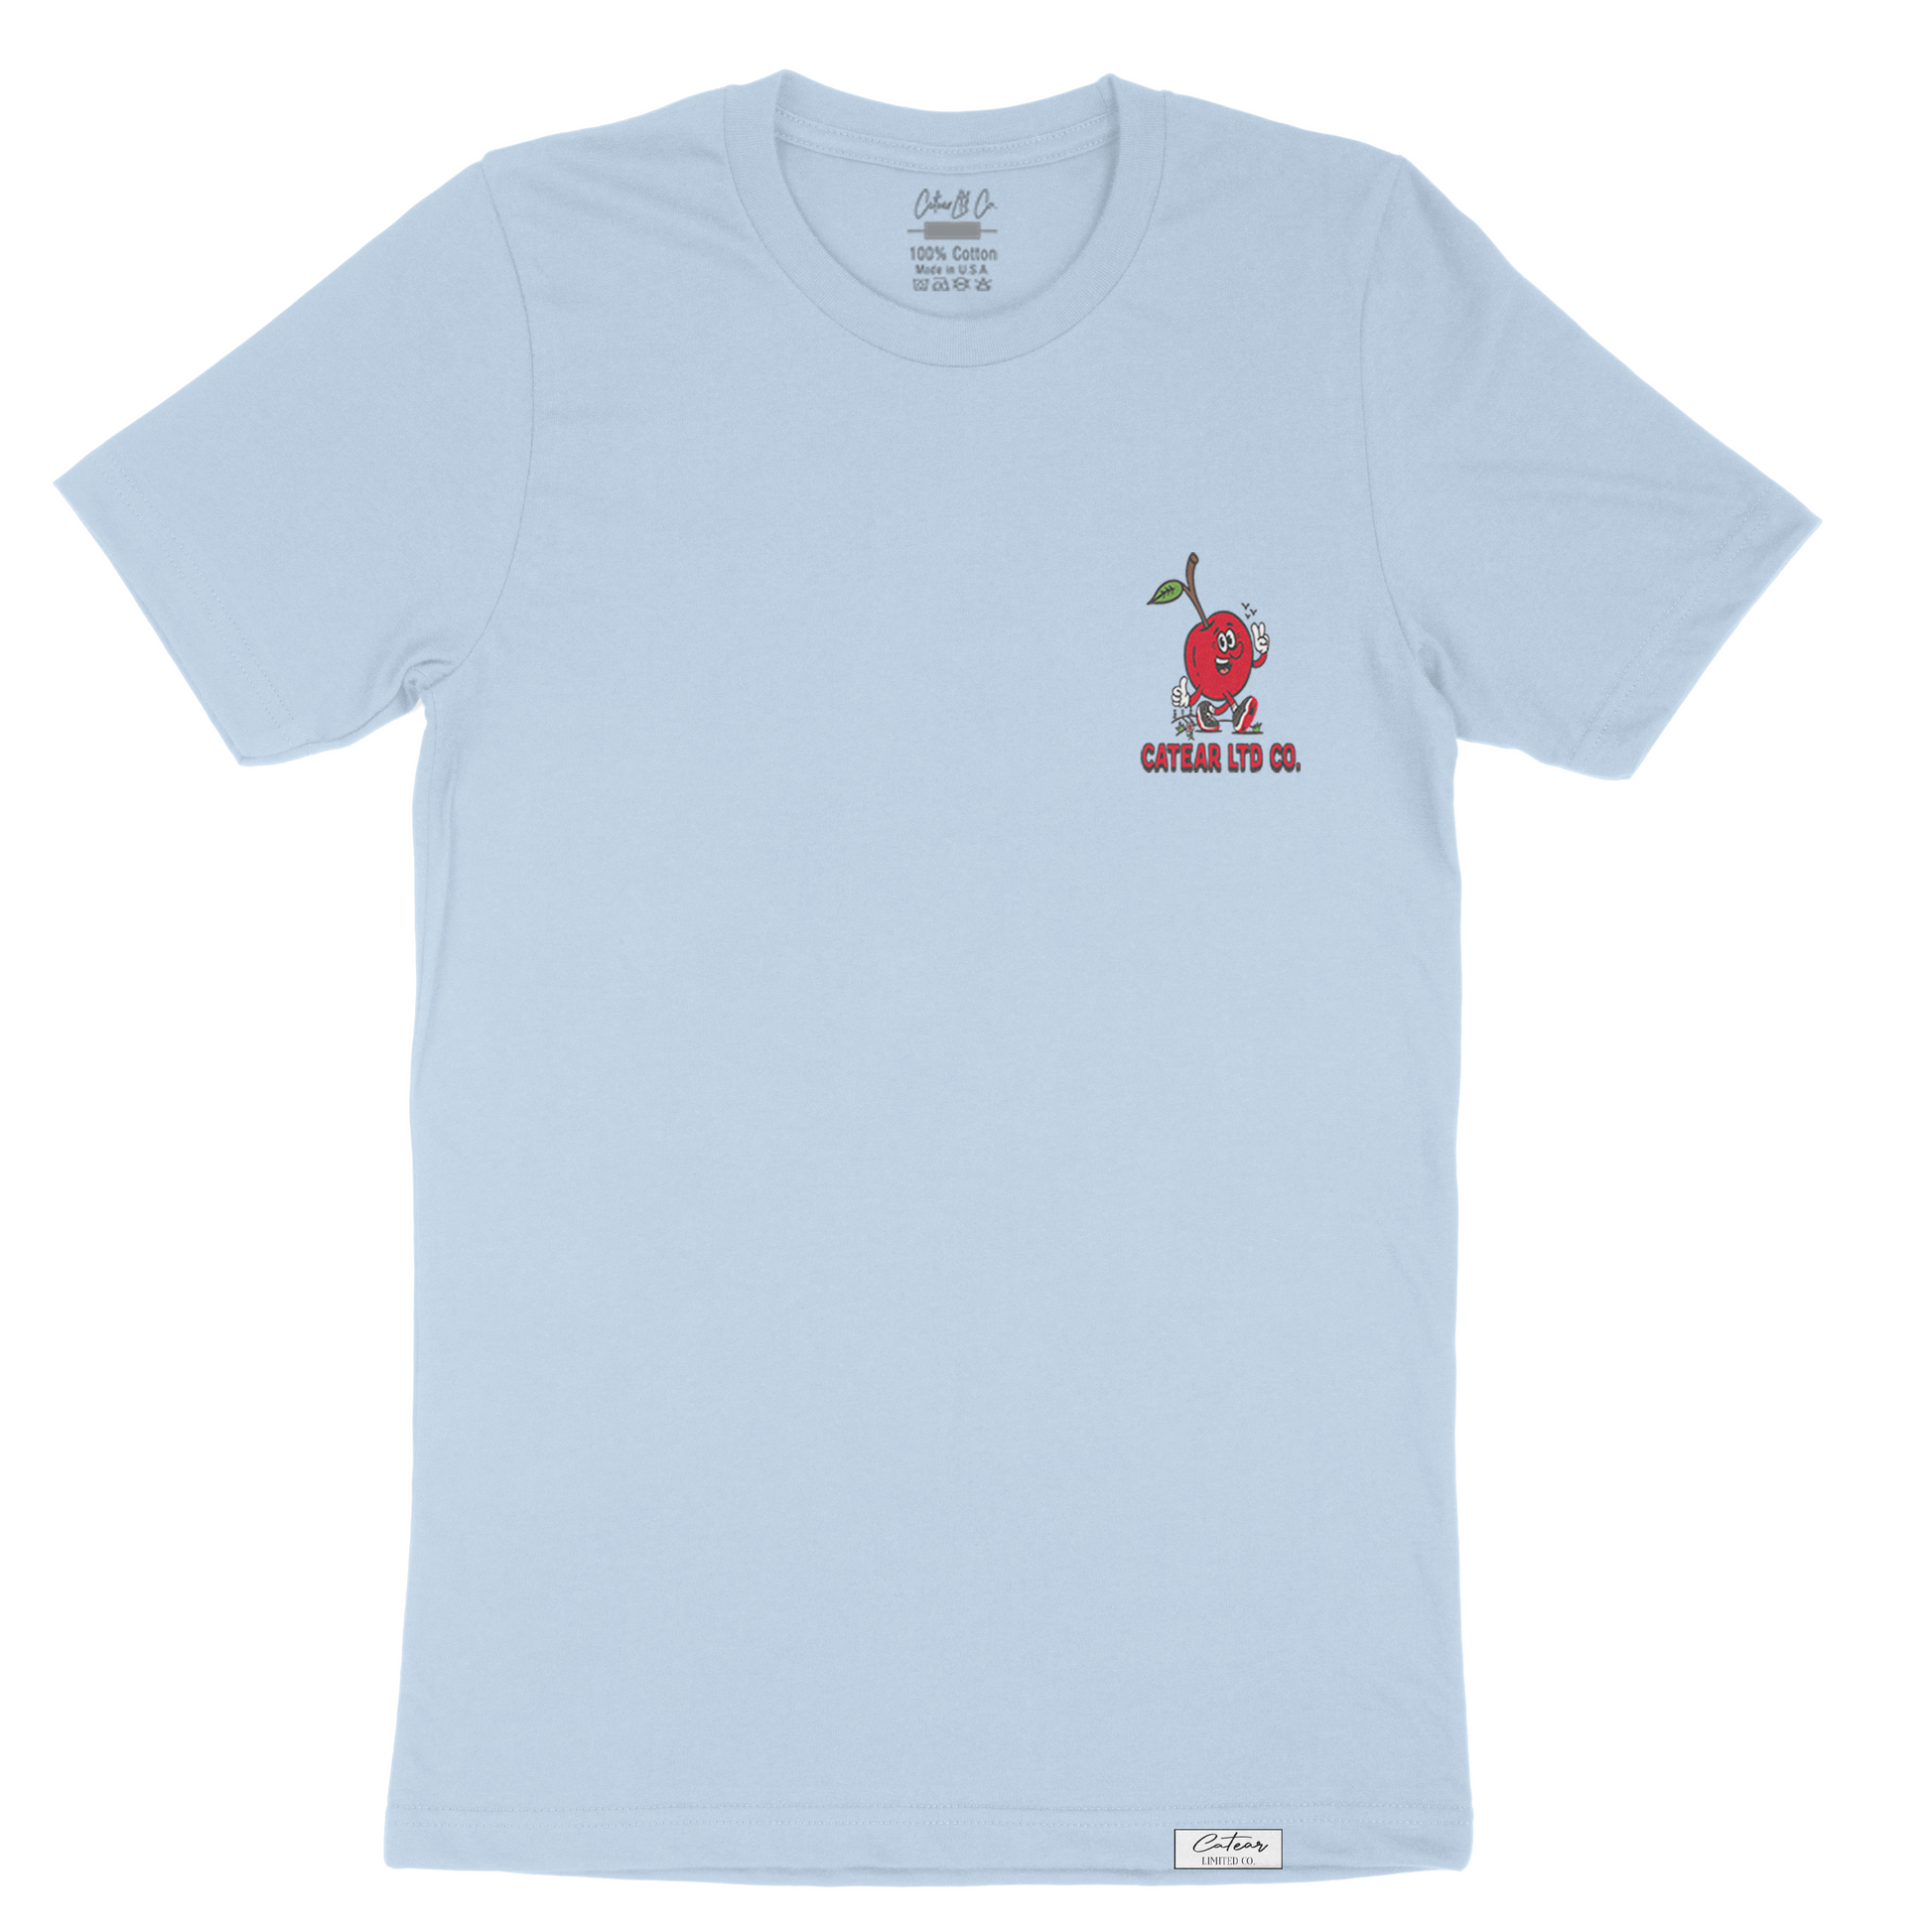 Unisex Baby Blue color tee with walking cherry & CATEAR brand name screen printed on the front left chest, woven label on bottom left. Relaxed Fit & great feel.